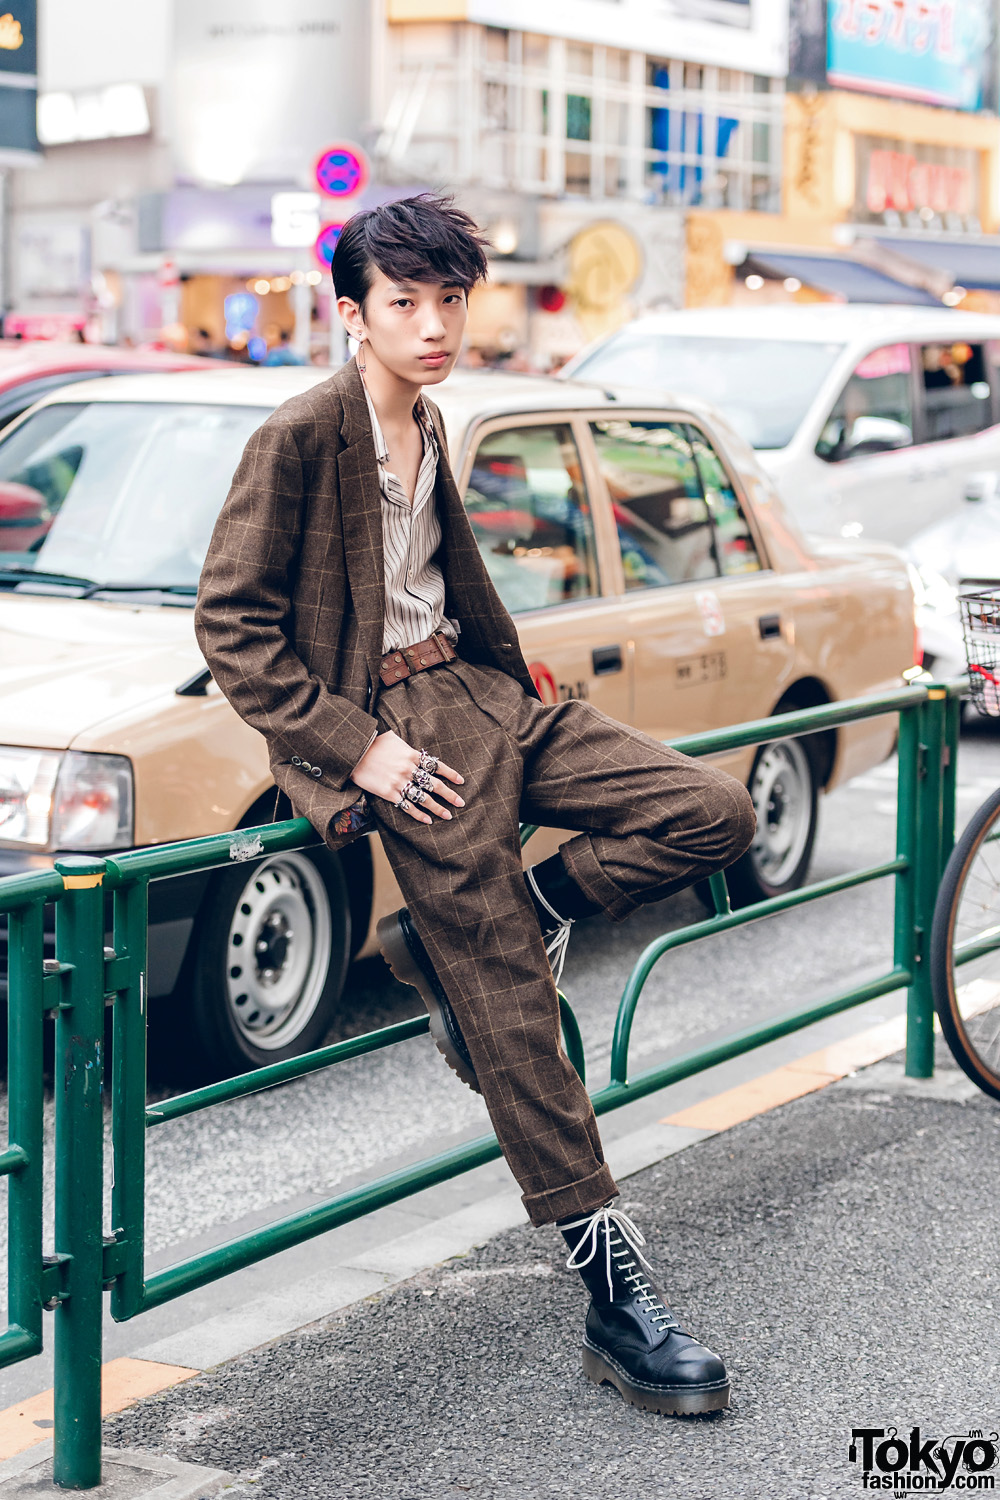 Paul Smith Tweed Suit & Dr. Martens Boots on The Street in Harajuku